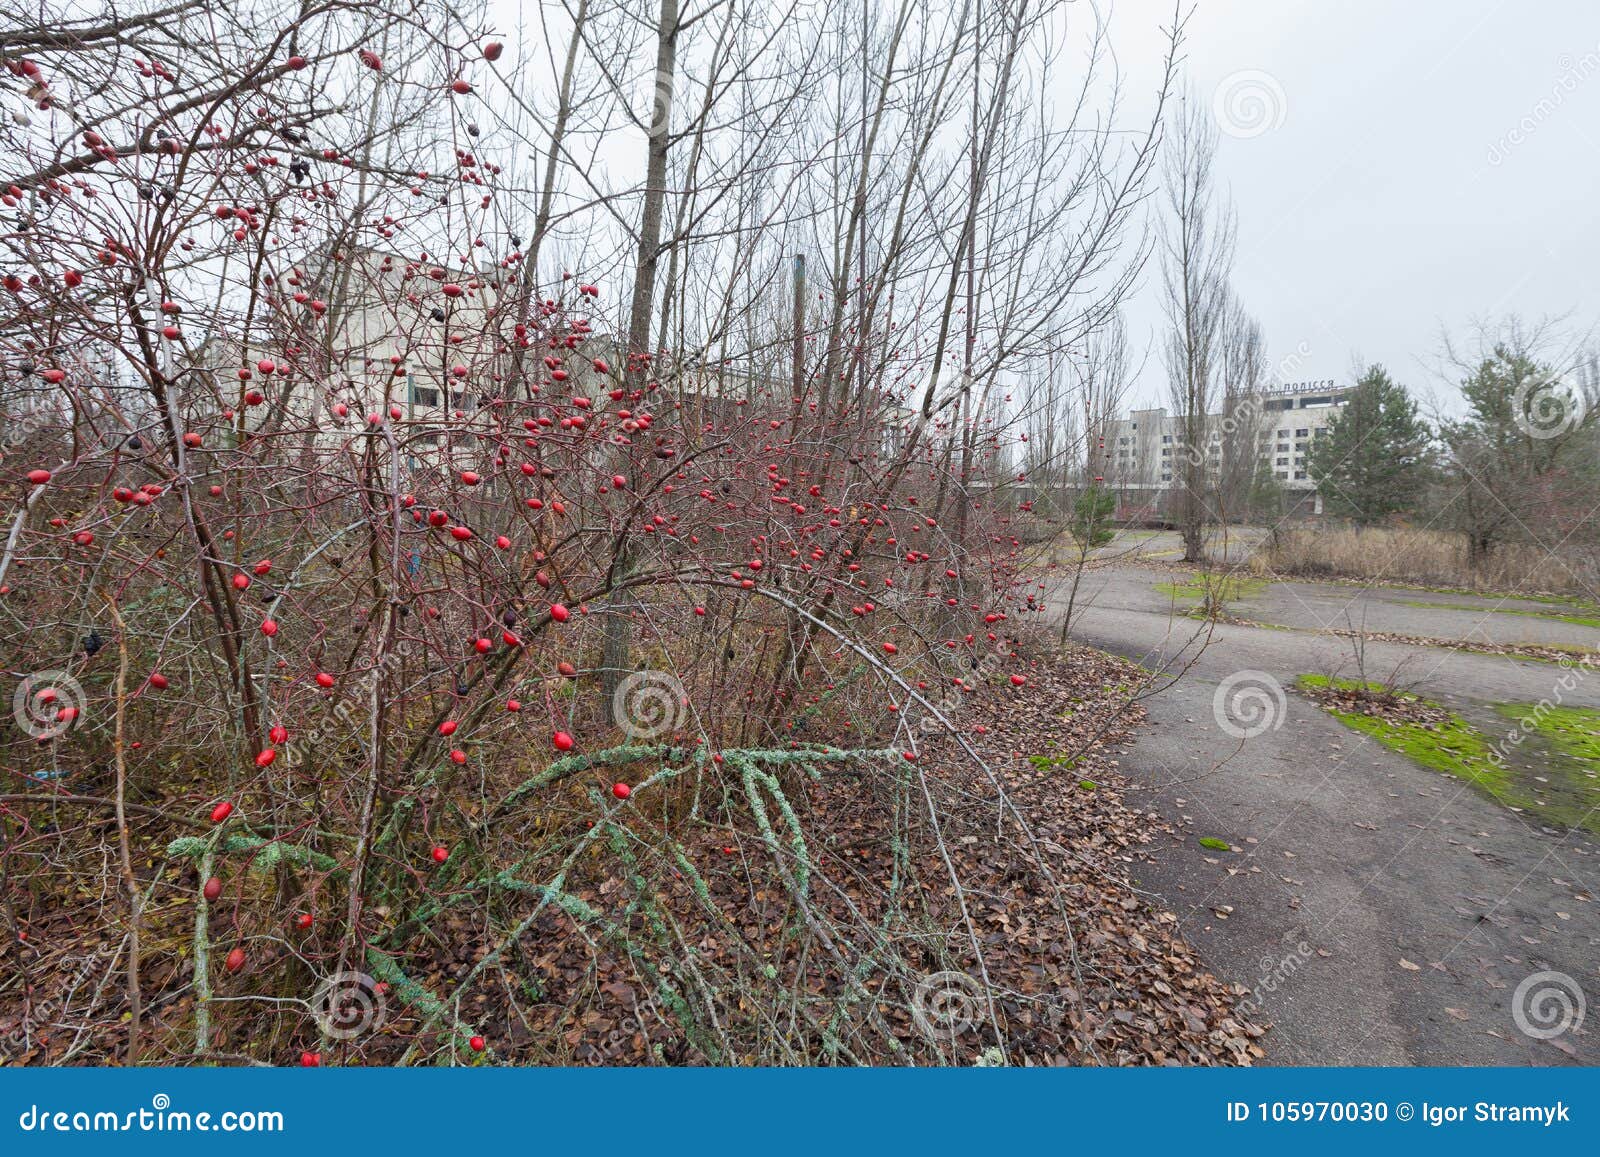 rose hips in central square in overgrown ghost city pripyat.